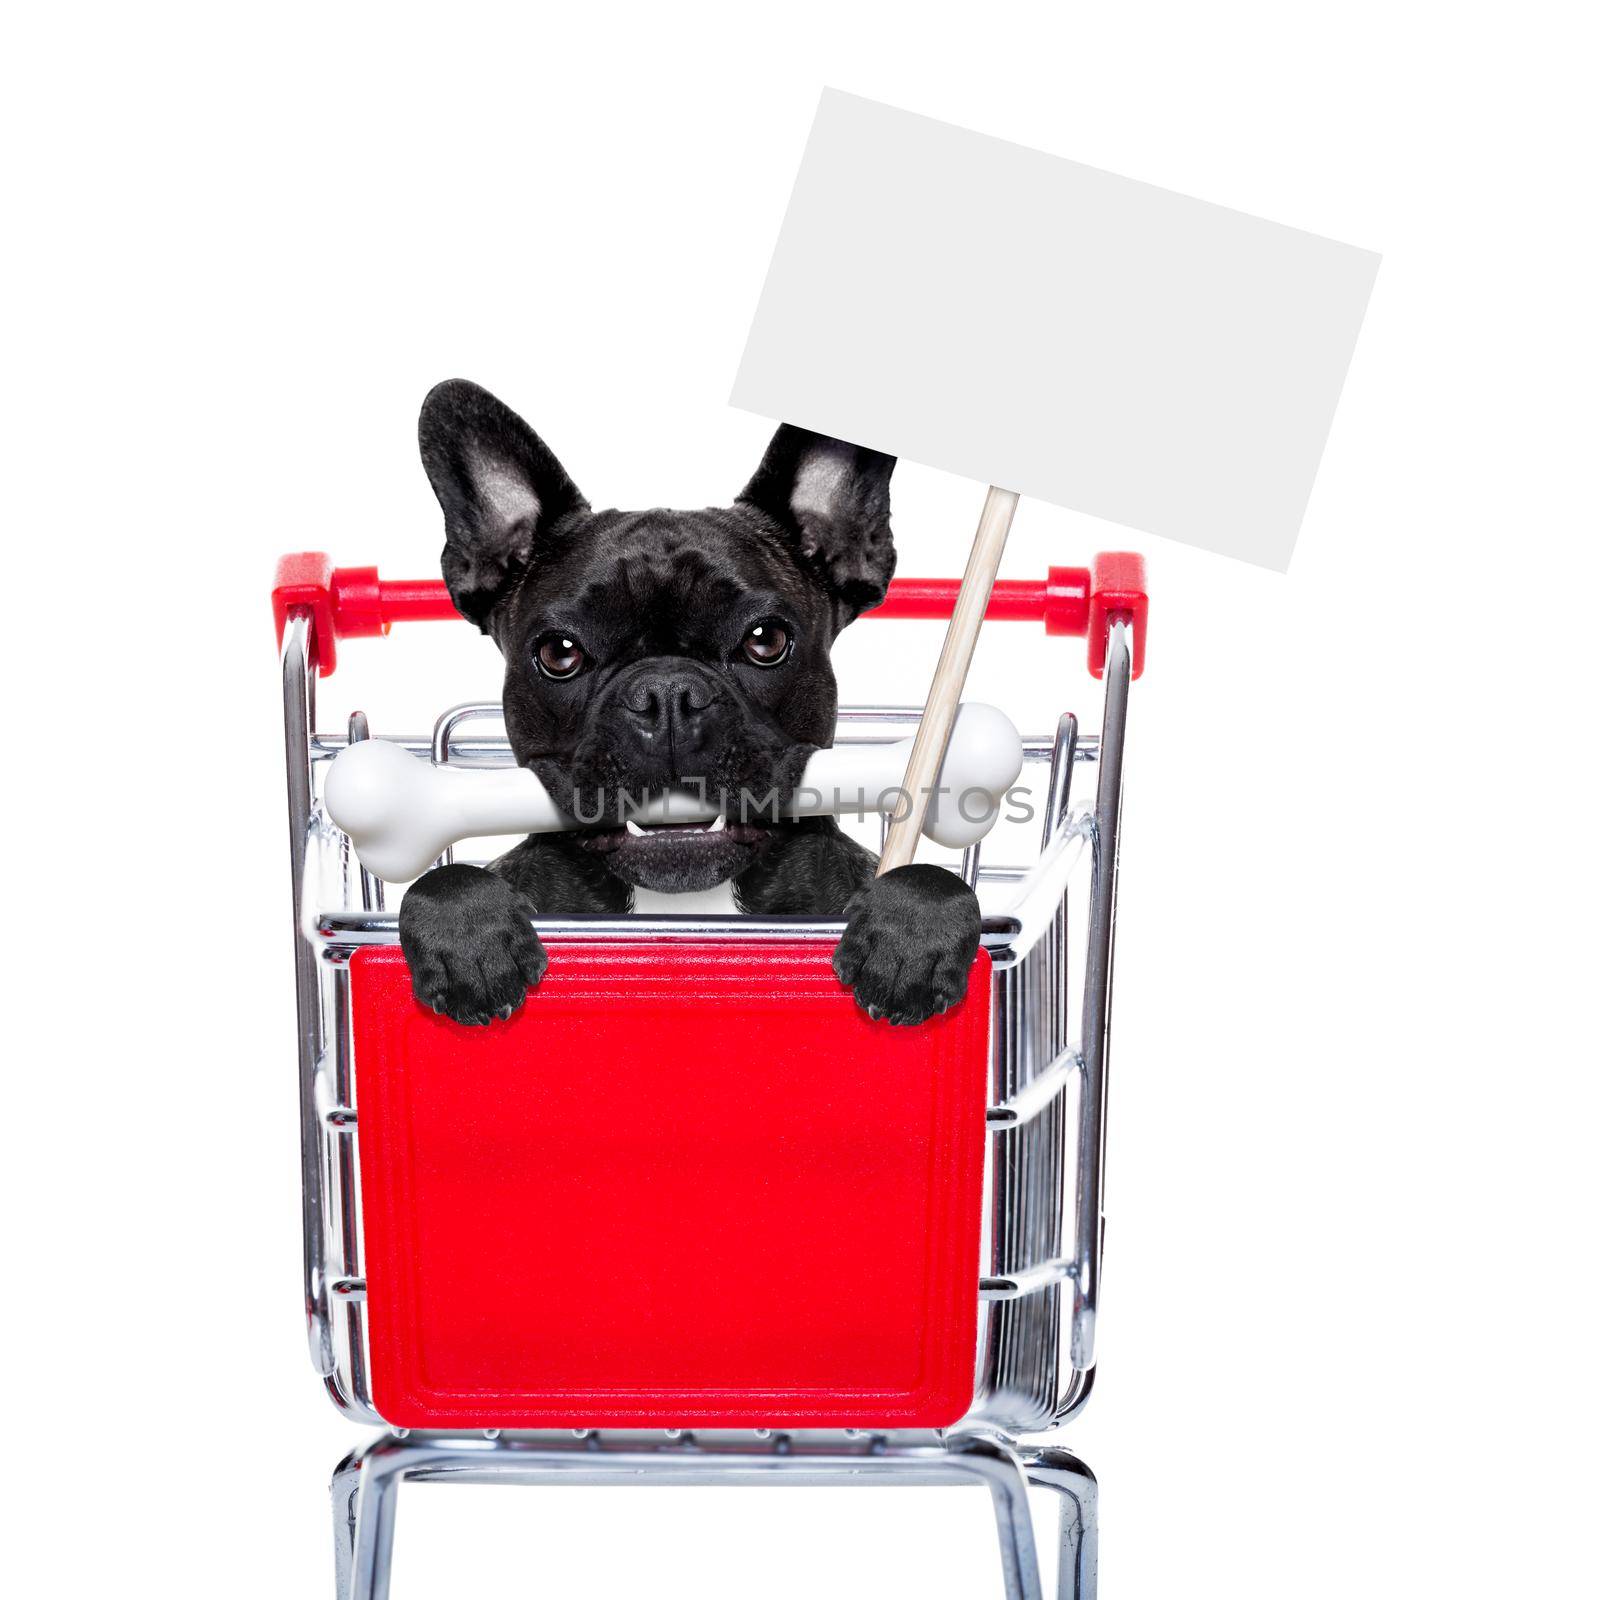 shopping cart dogs by Brosch